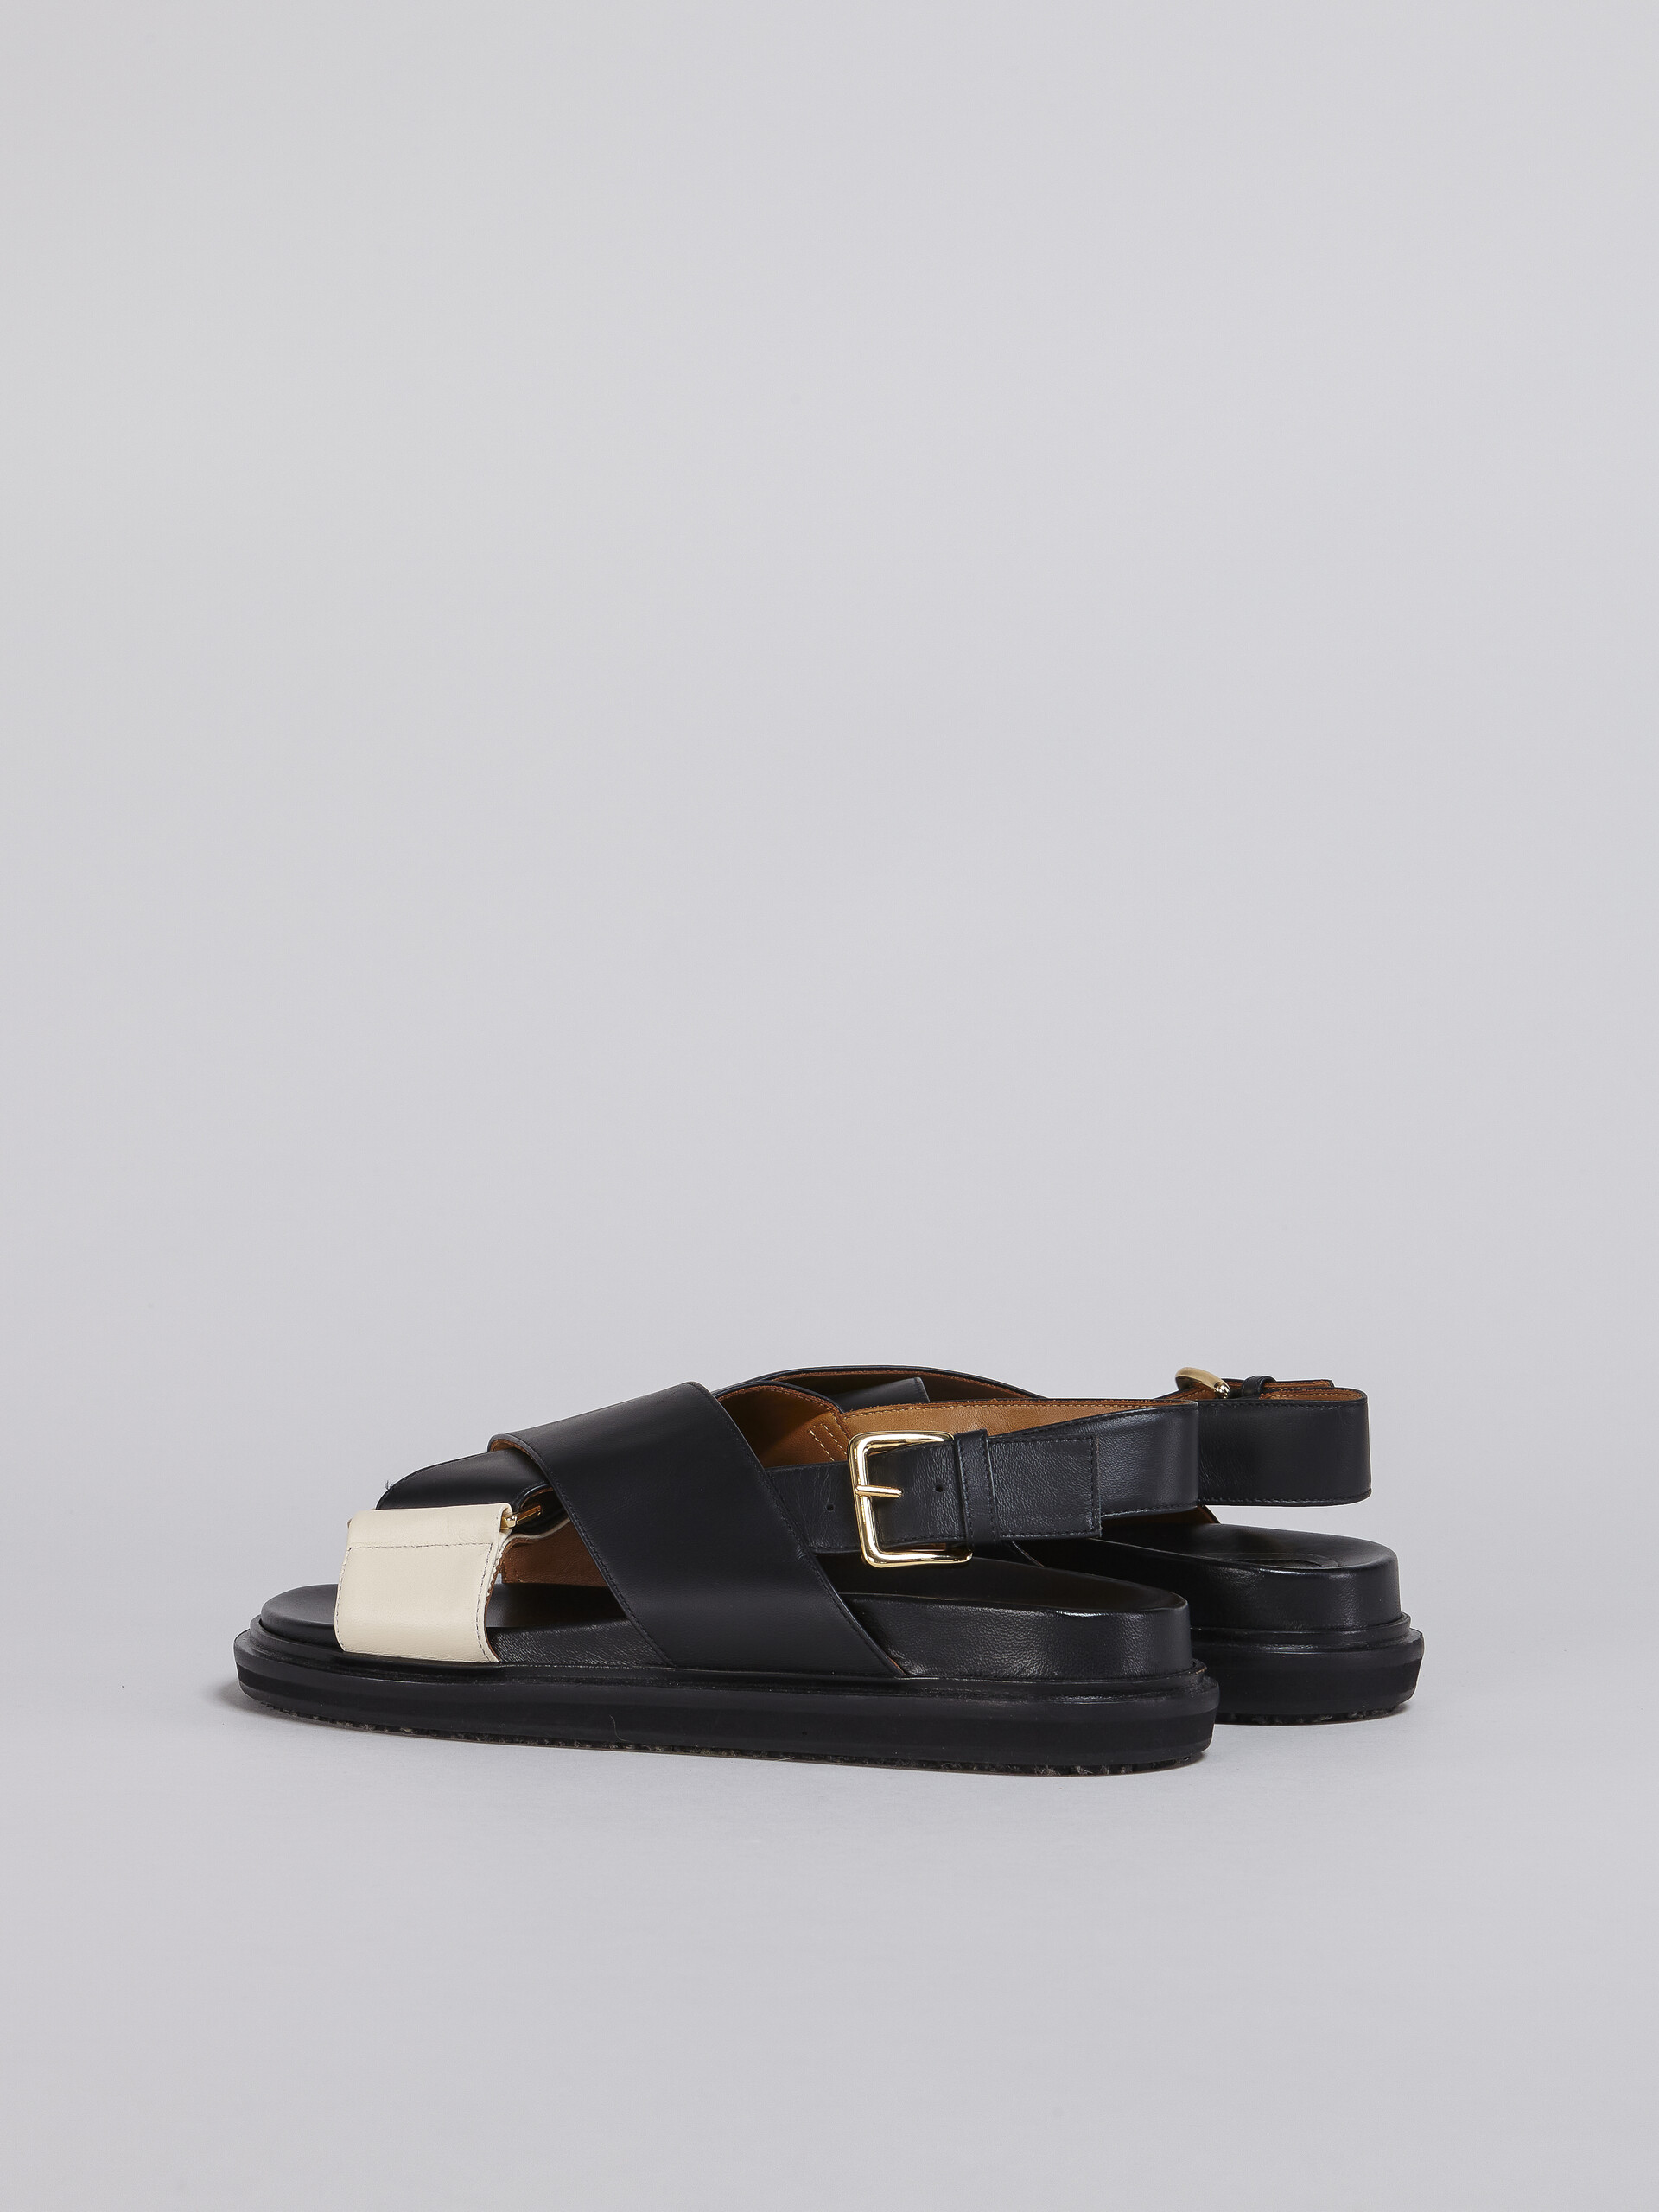 Black and white leather Fussbett - Sandals - Image 3